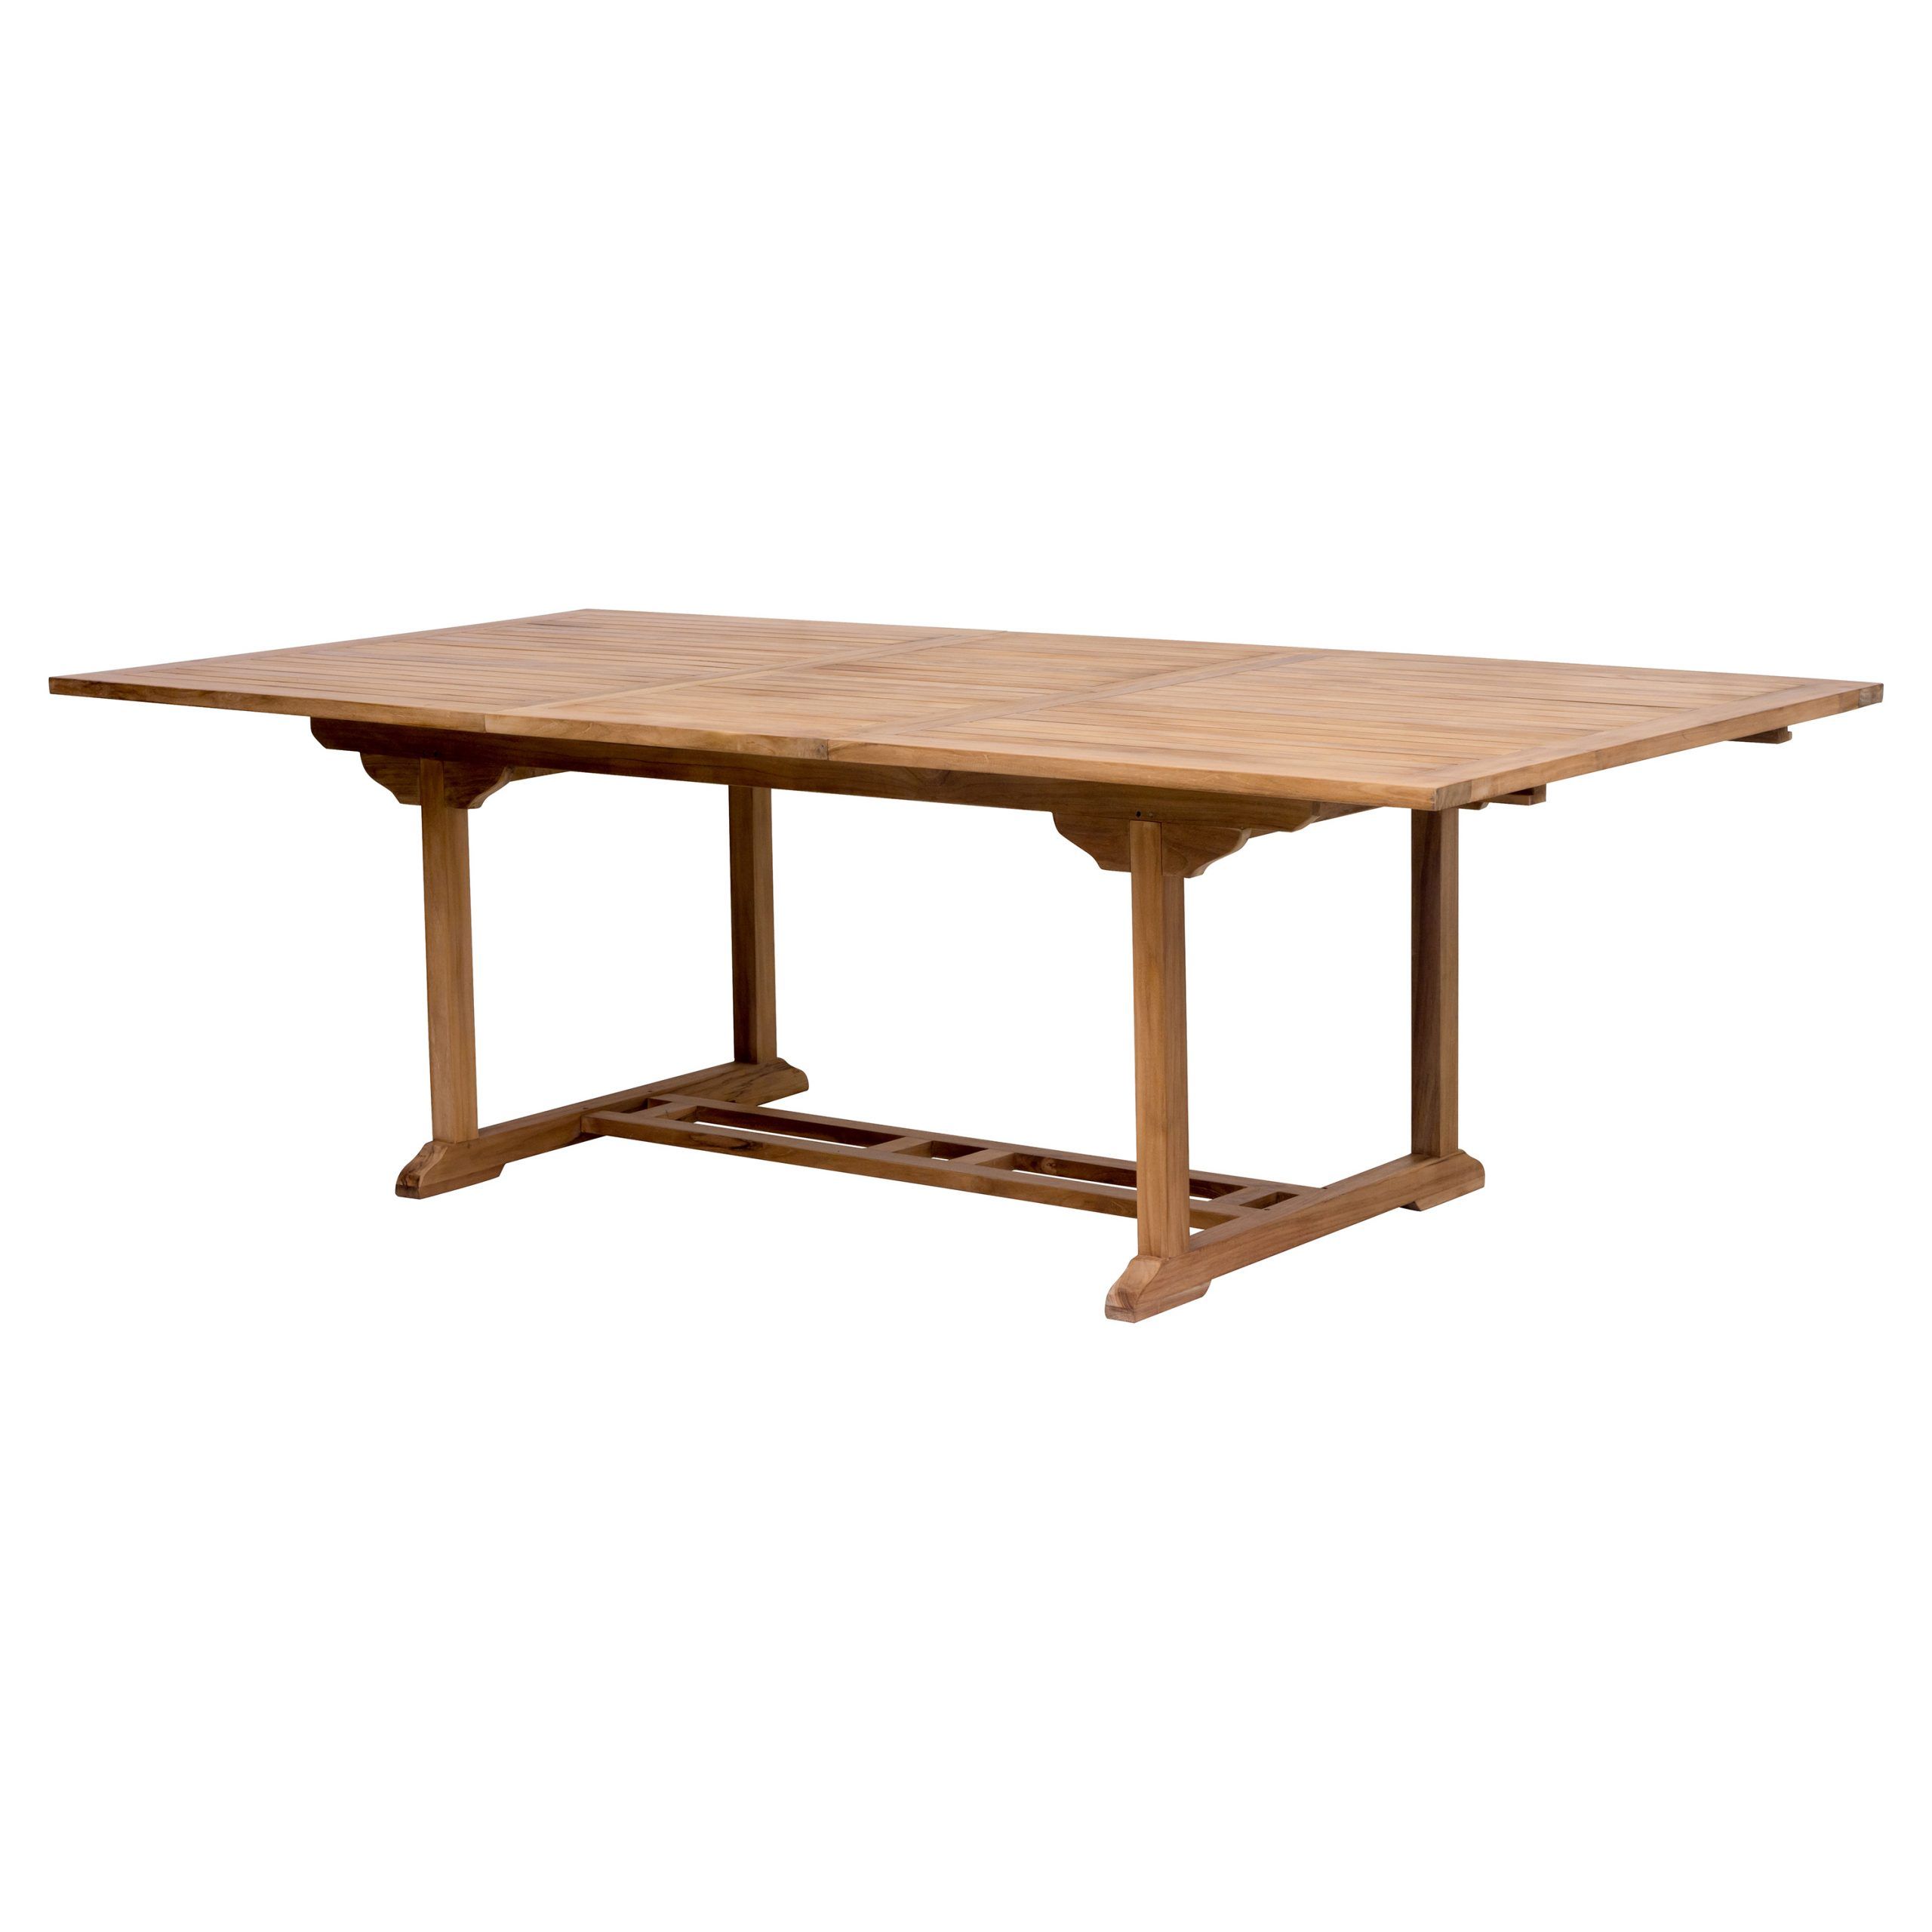 Katarina Extendable Rubberwood Solid Wood Dining Tables Inside Preferred Reena Modern Classic Solid Teak Wood Outdoor Dining Table (View 4 of 20)